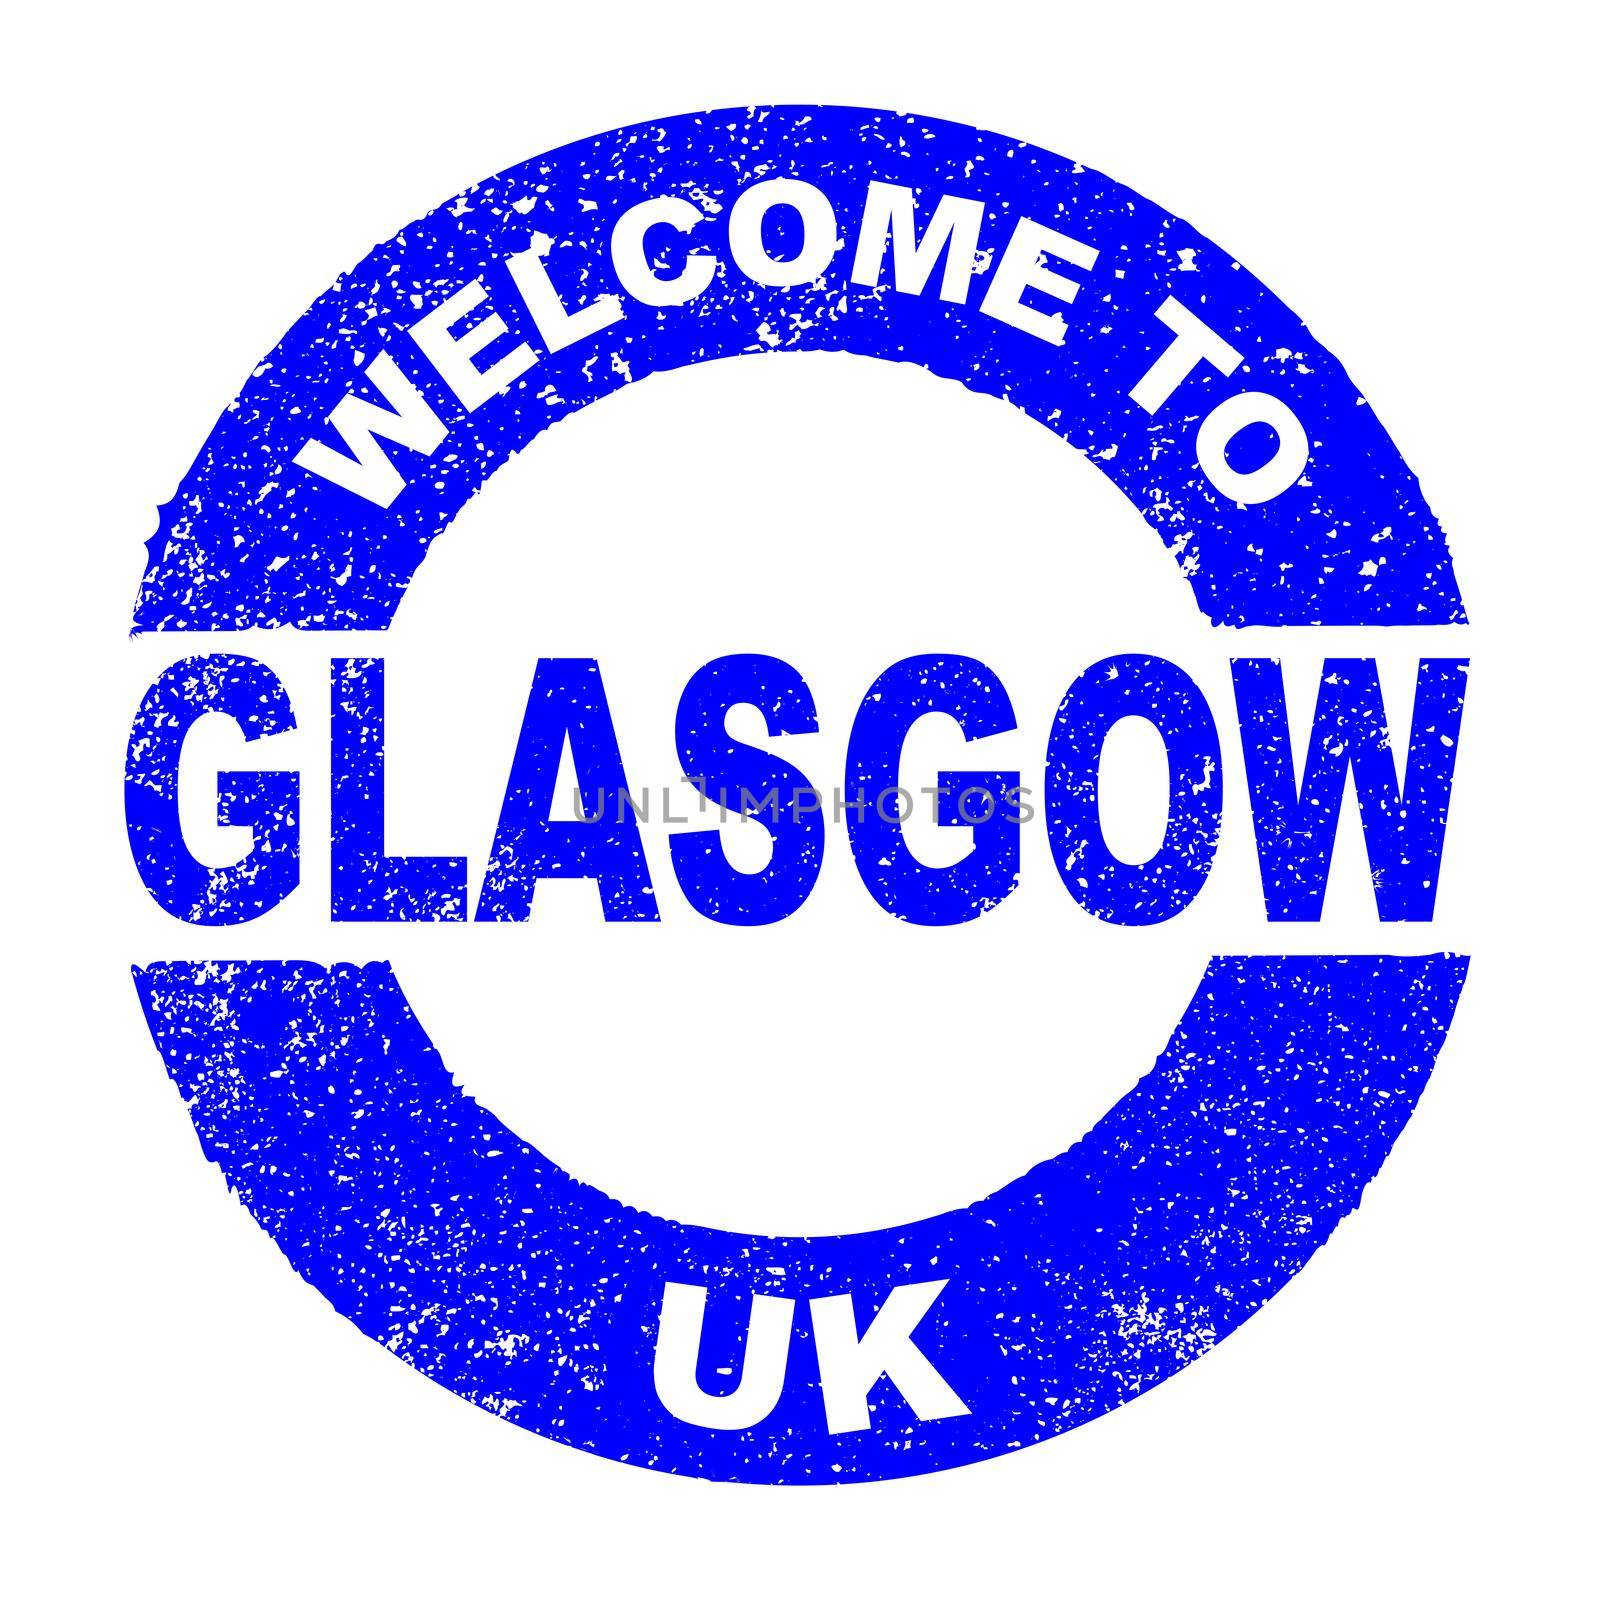 A grunge rubber ink stamp with the text Welcome To Glasgow UK over a white background